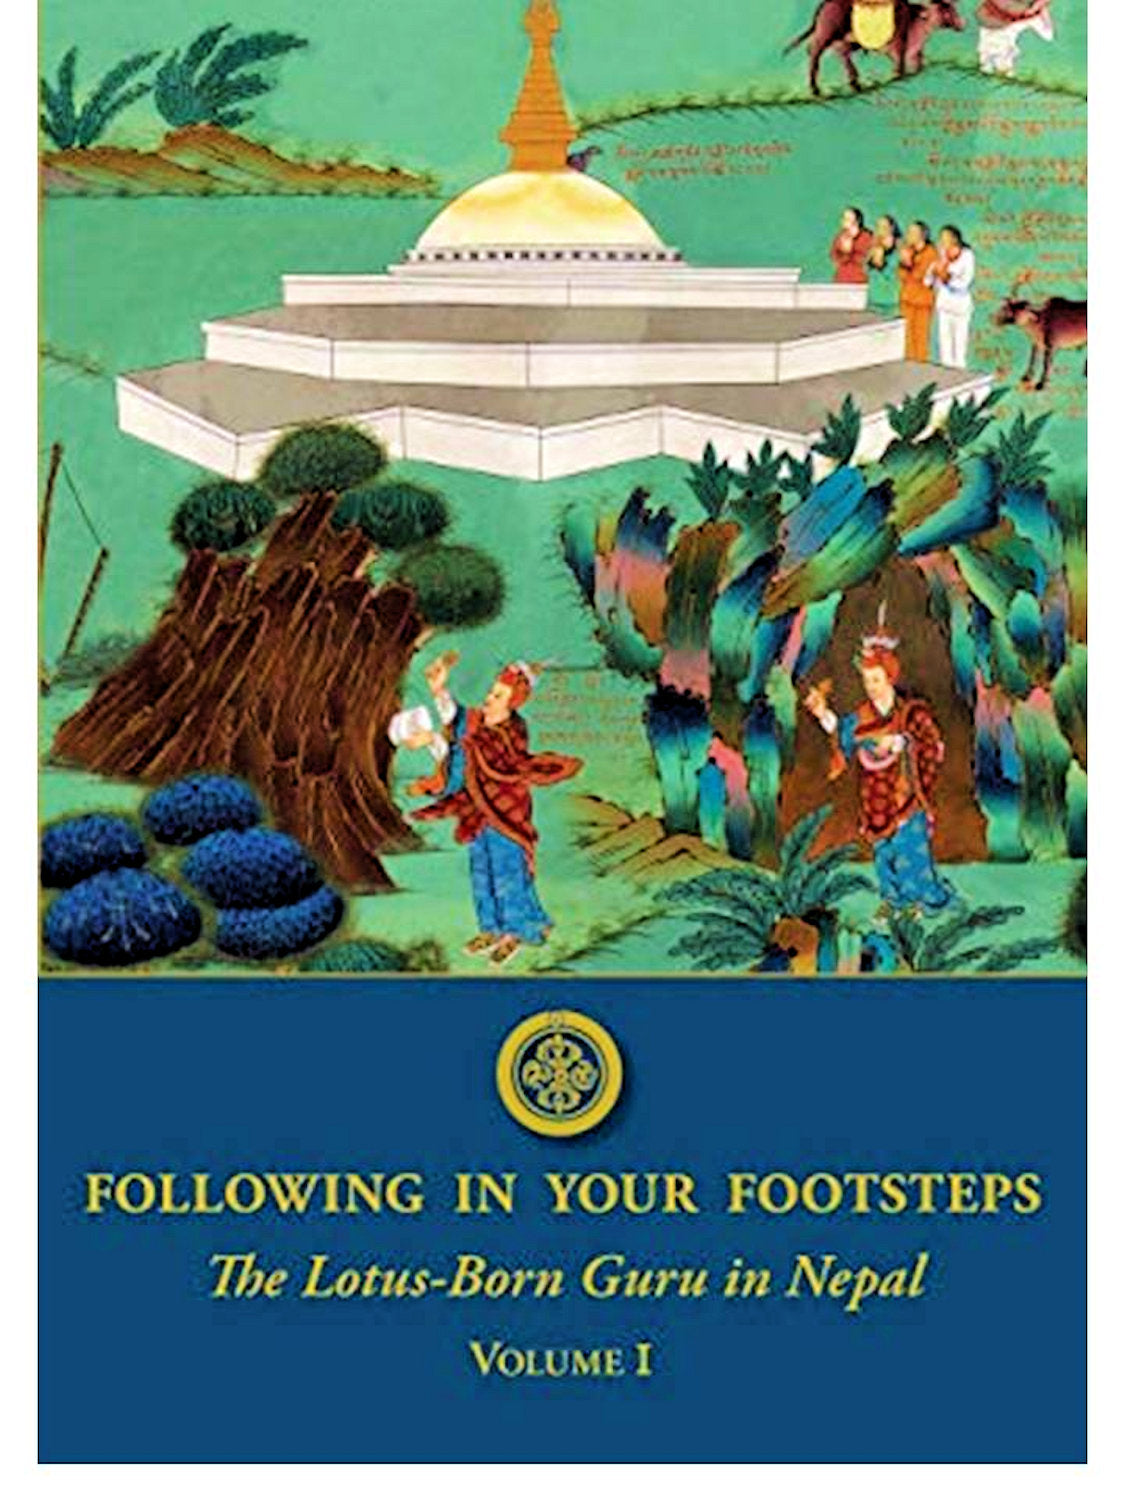 Following In Your Footsteps Volume 1: Nepal by Padmasambhava